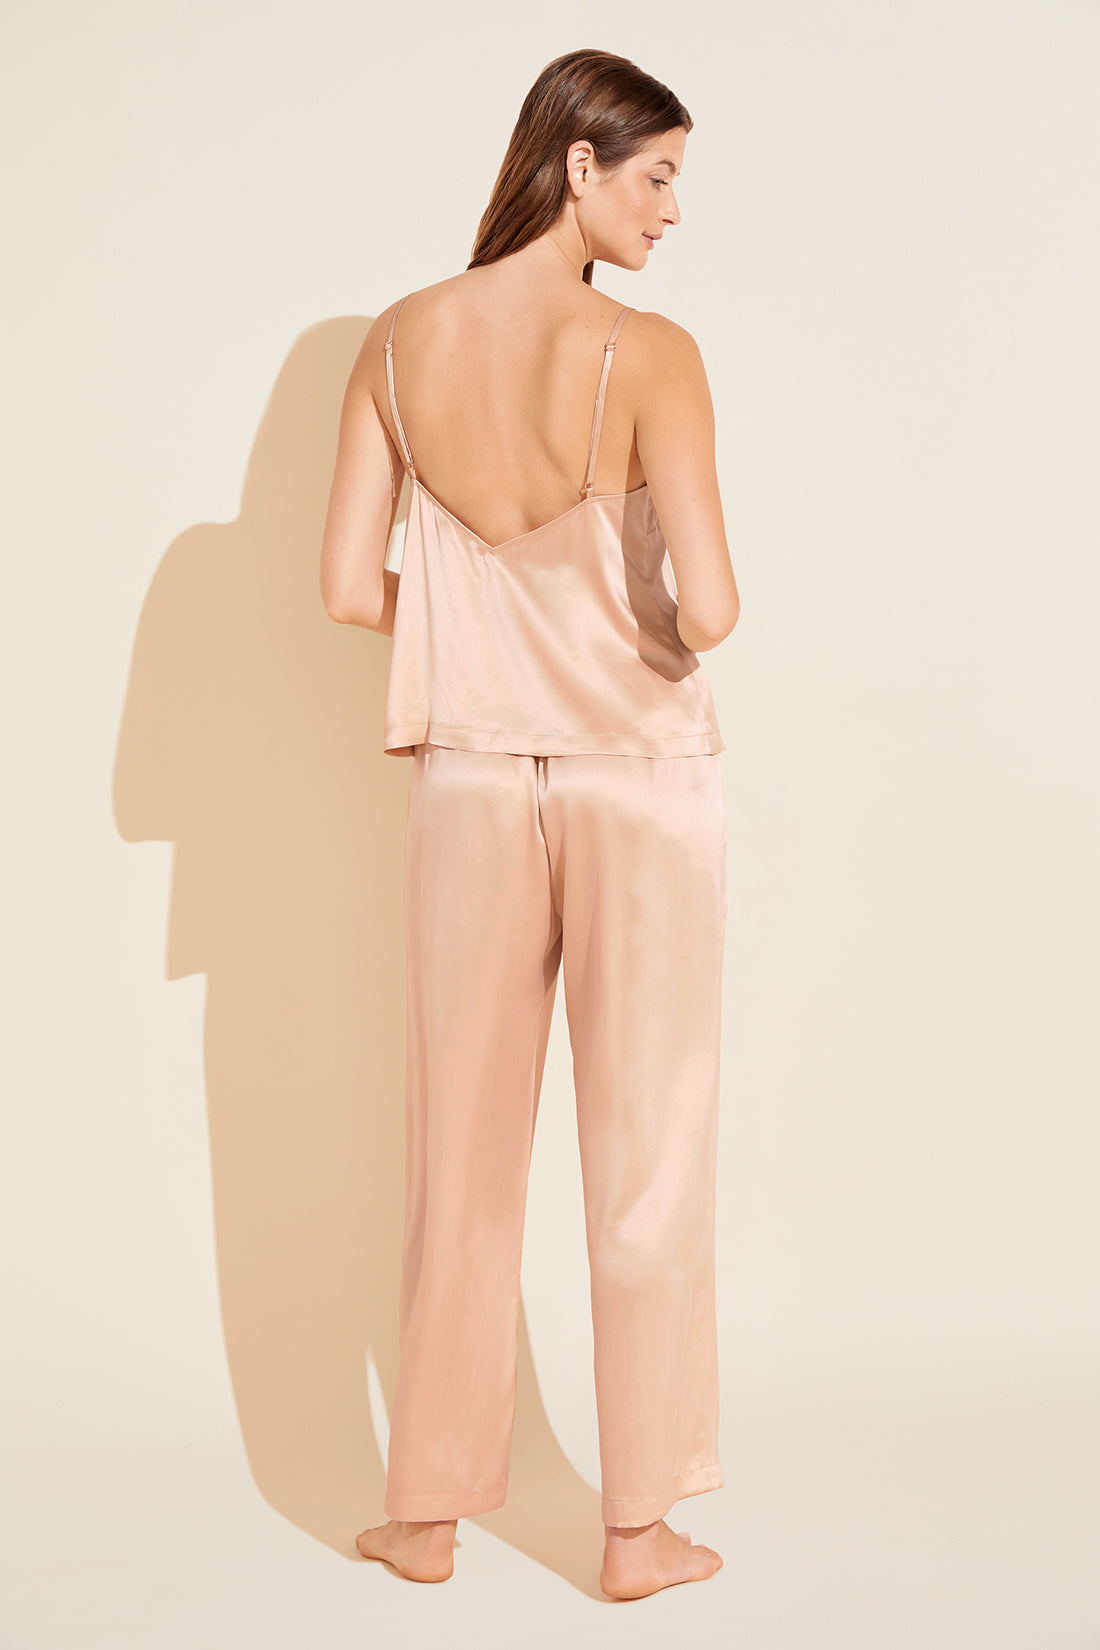 Silk Camisole Sets – Ethical Kind